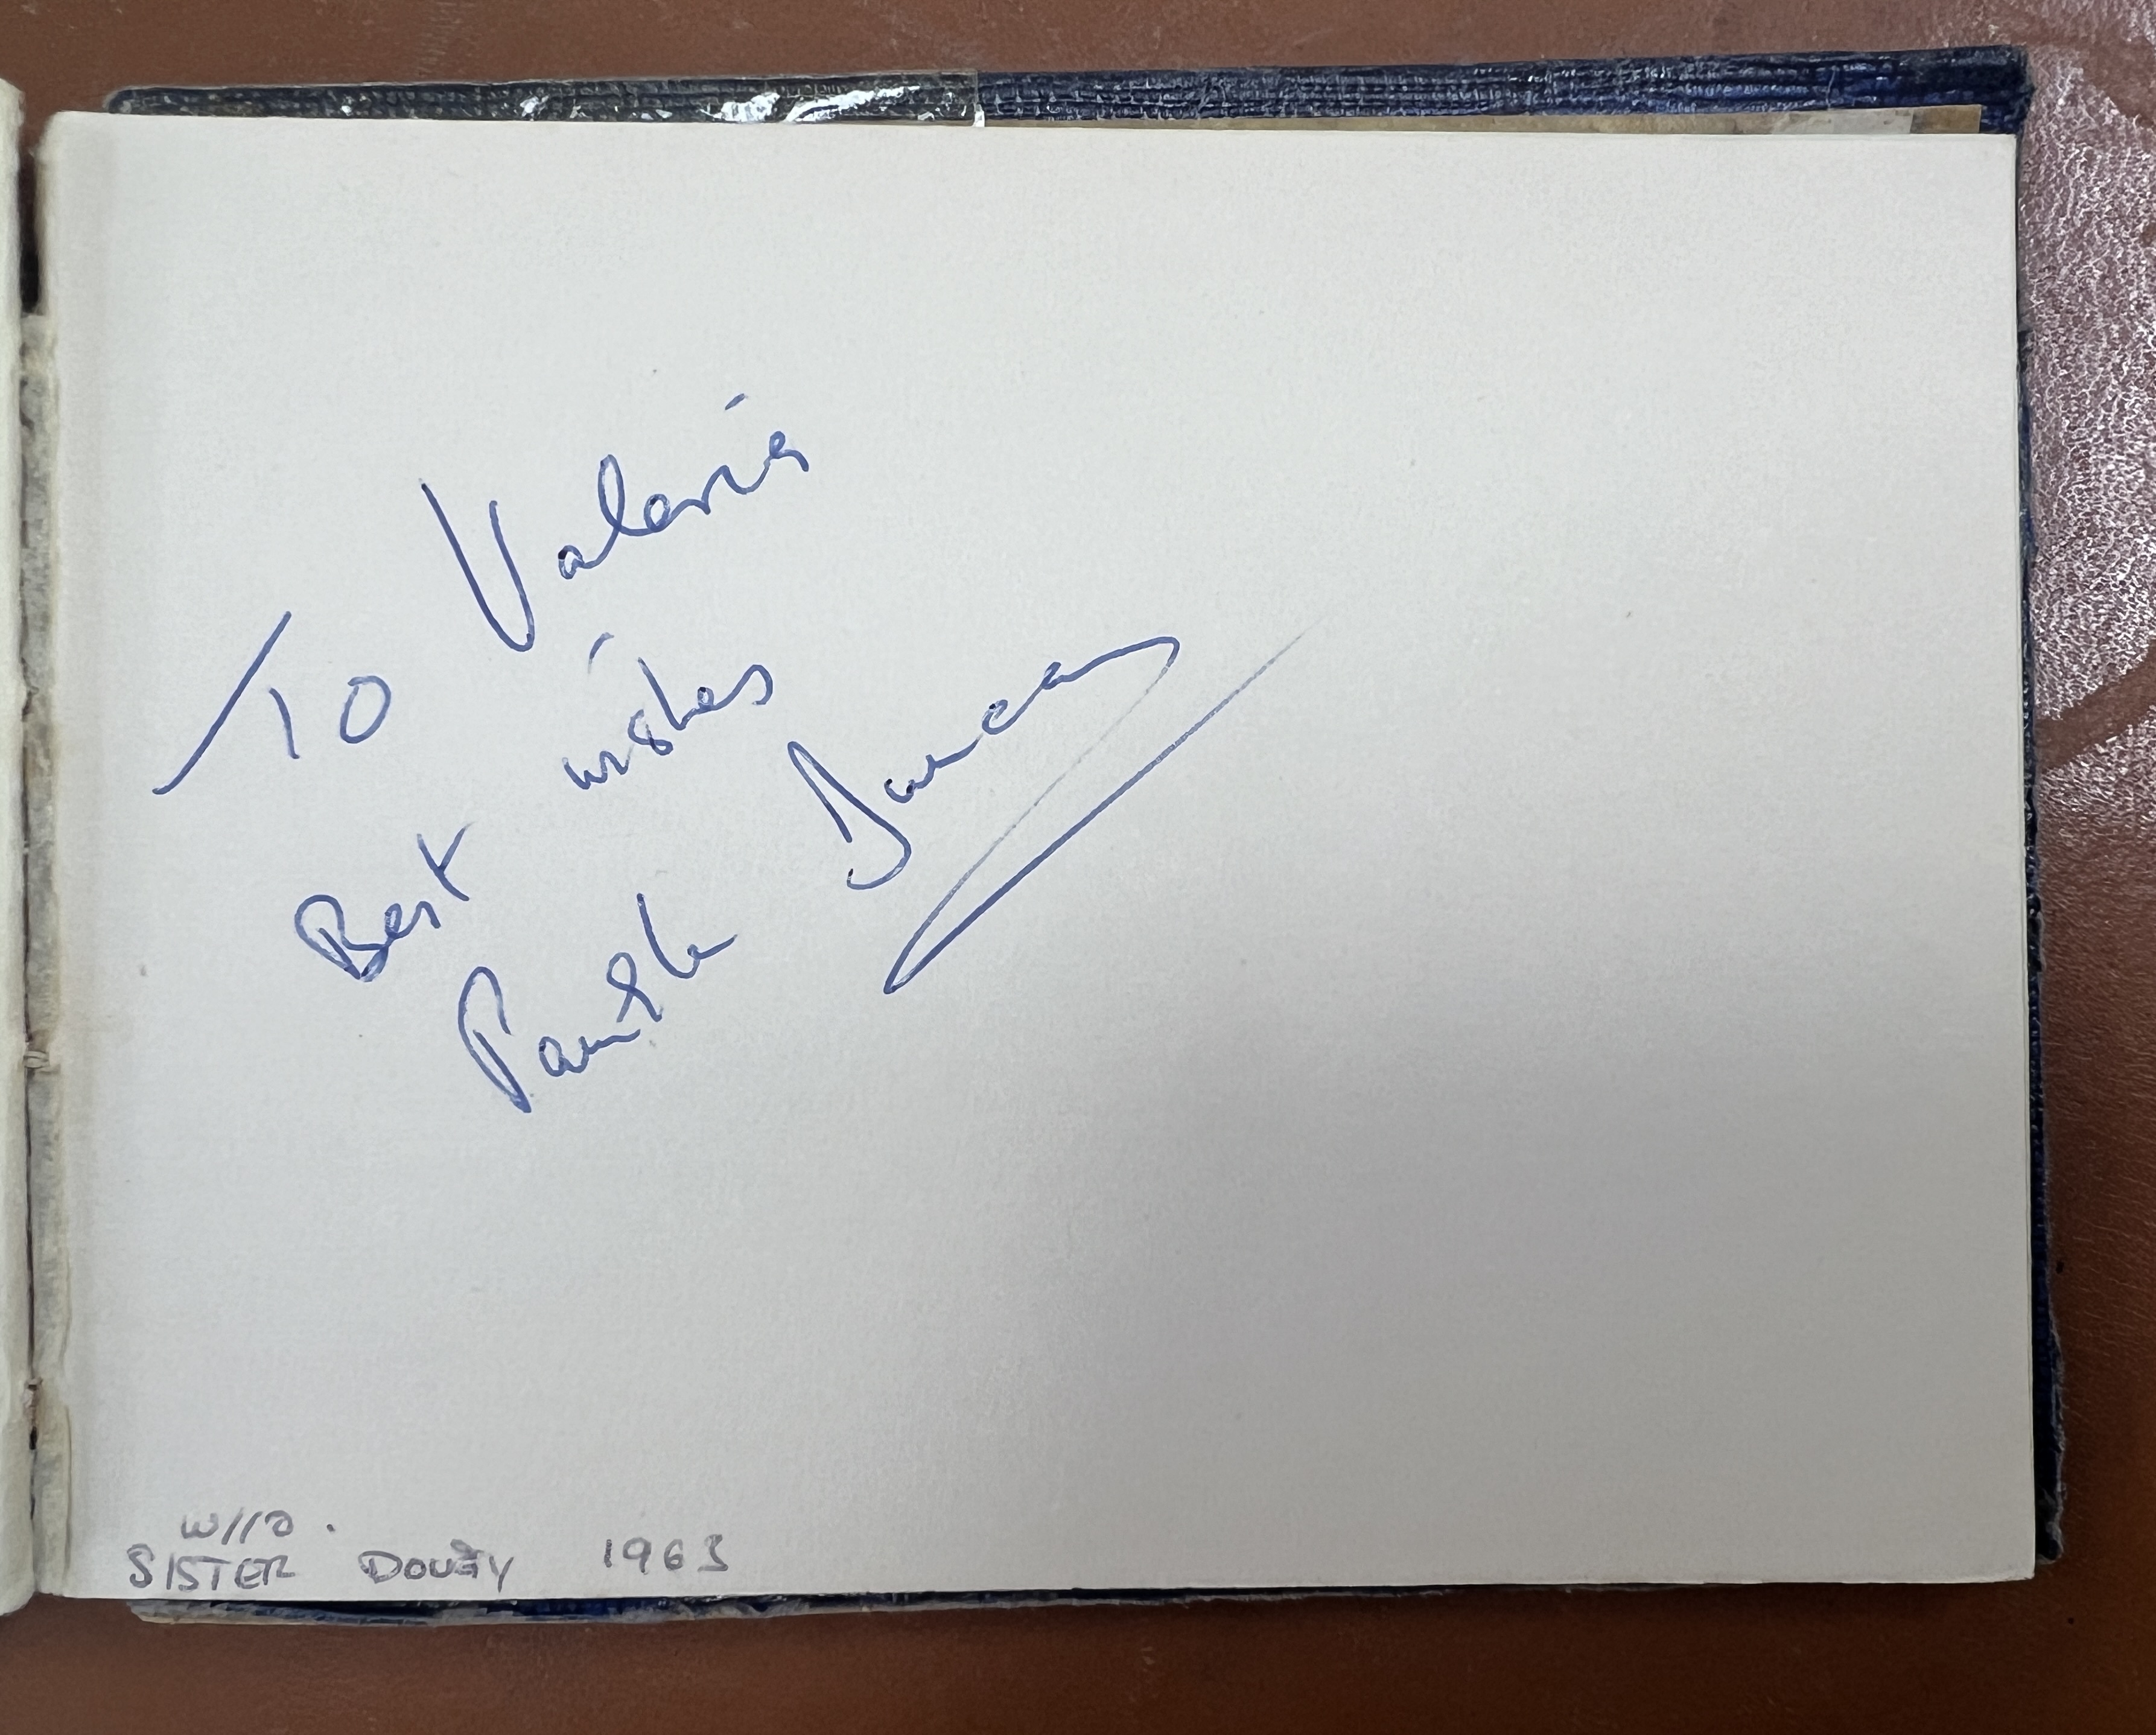 A 1960's autograph album containing autographs of various celebrities including Cliff Richard, - Image 32 of 37